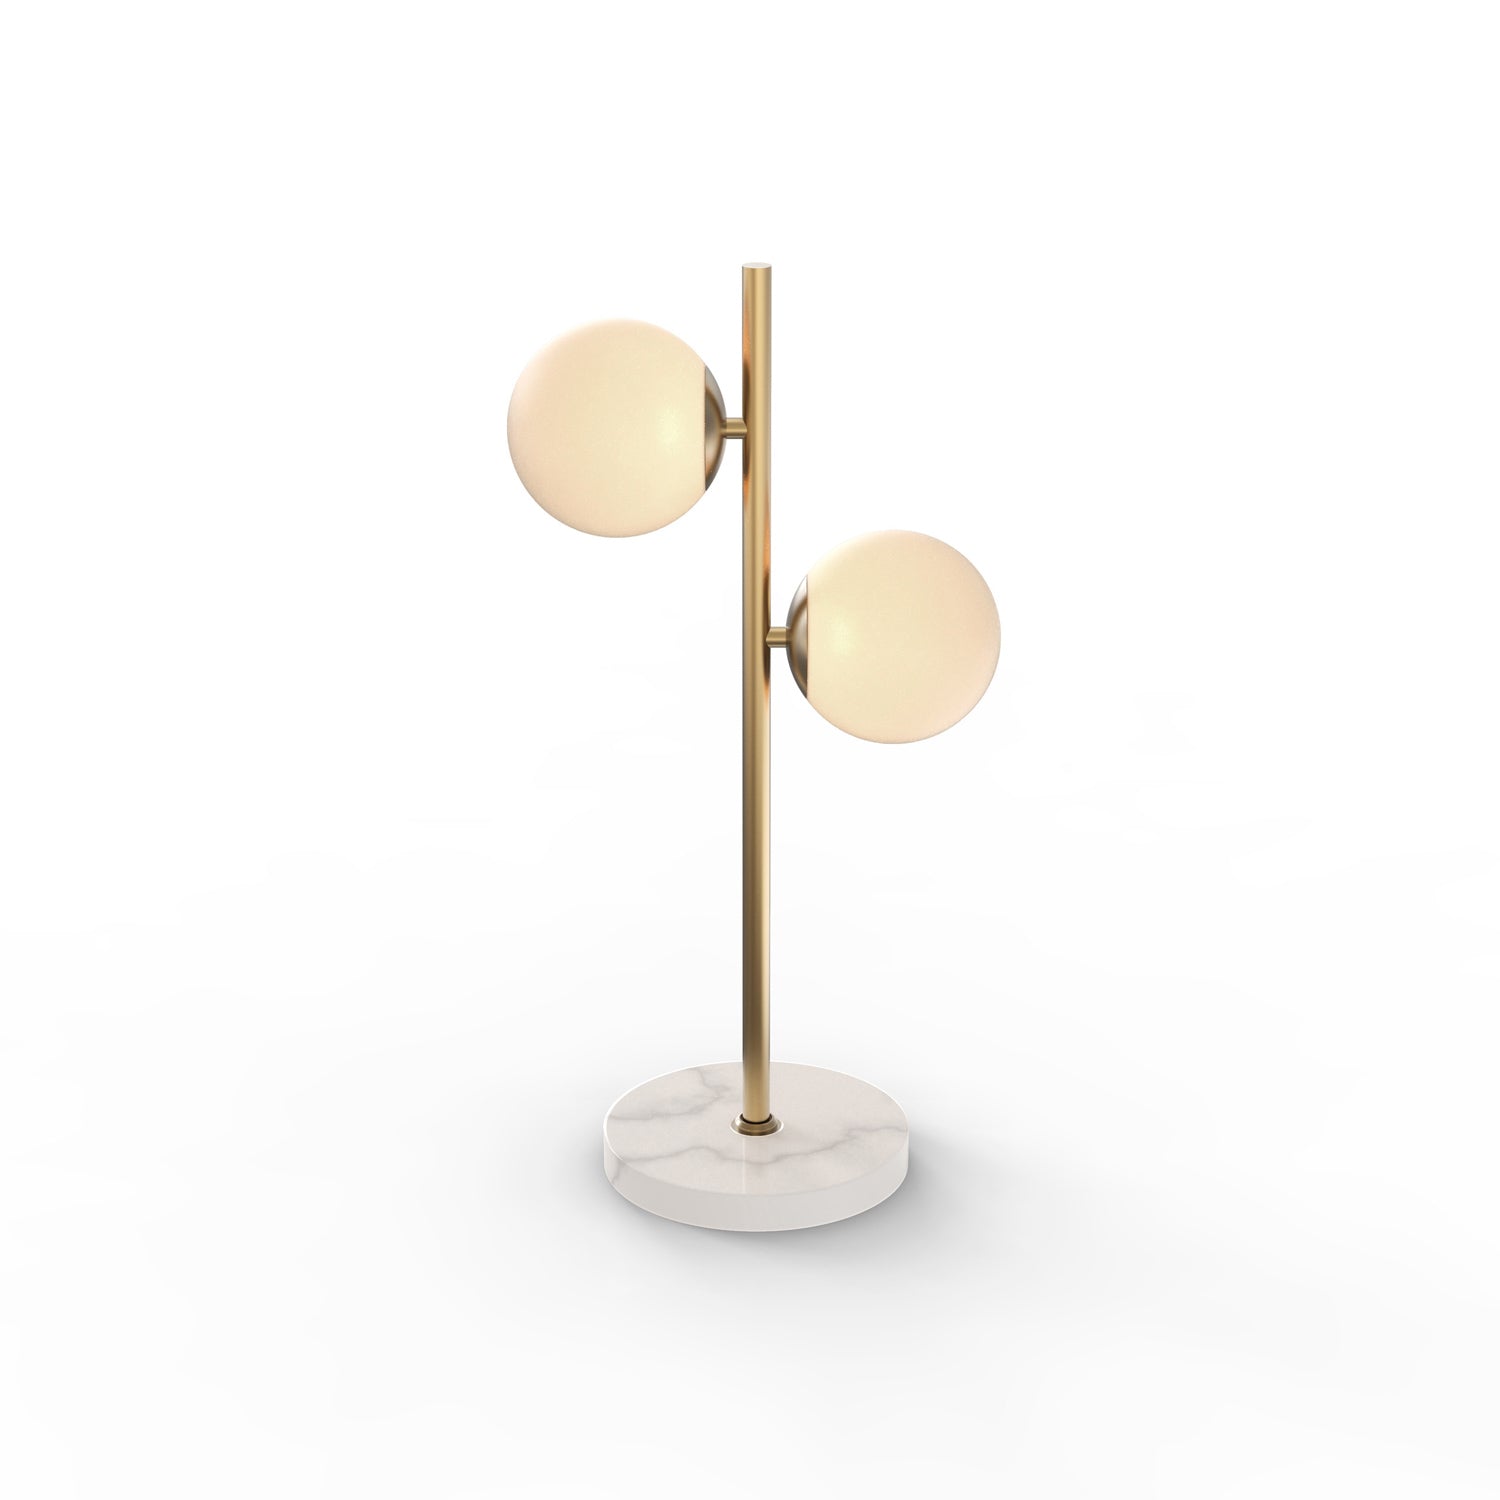 Castell 2 Globe LED Table Lamp, Aged Brass